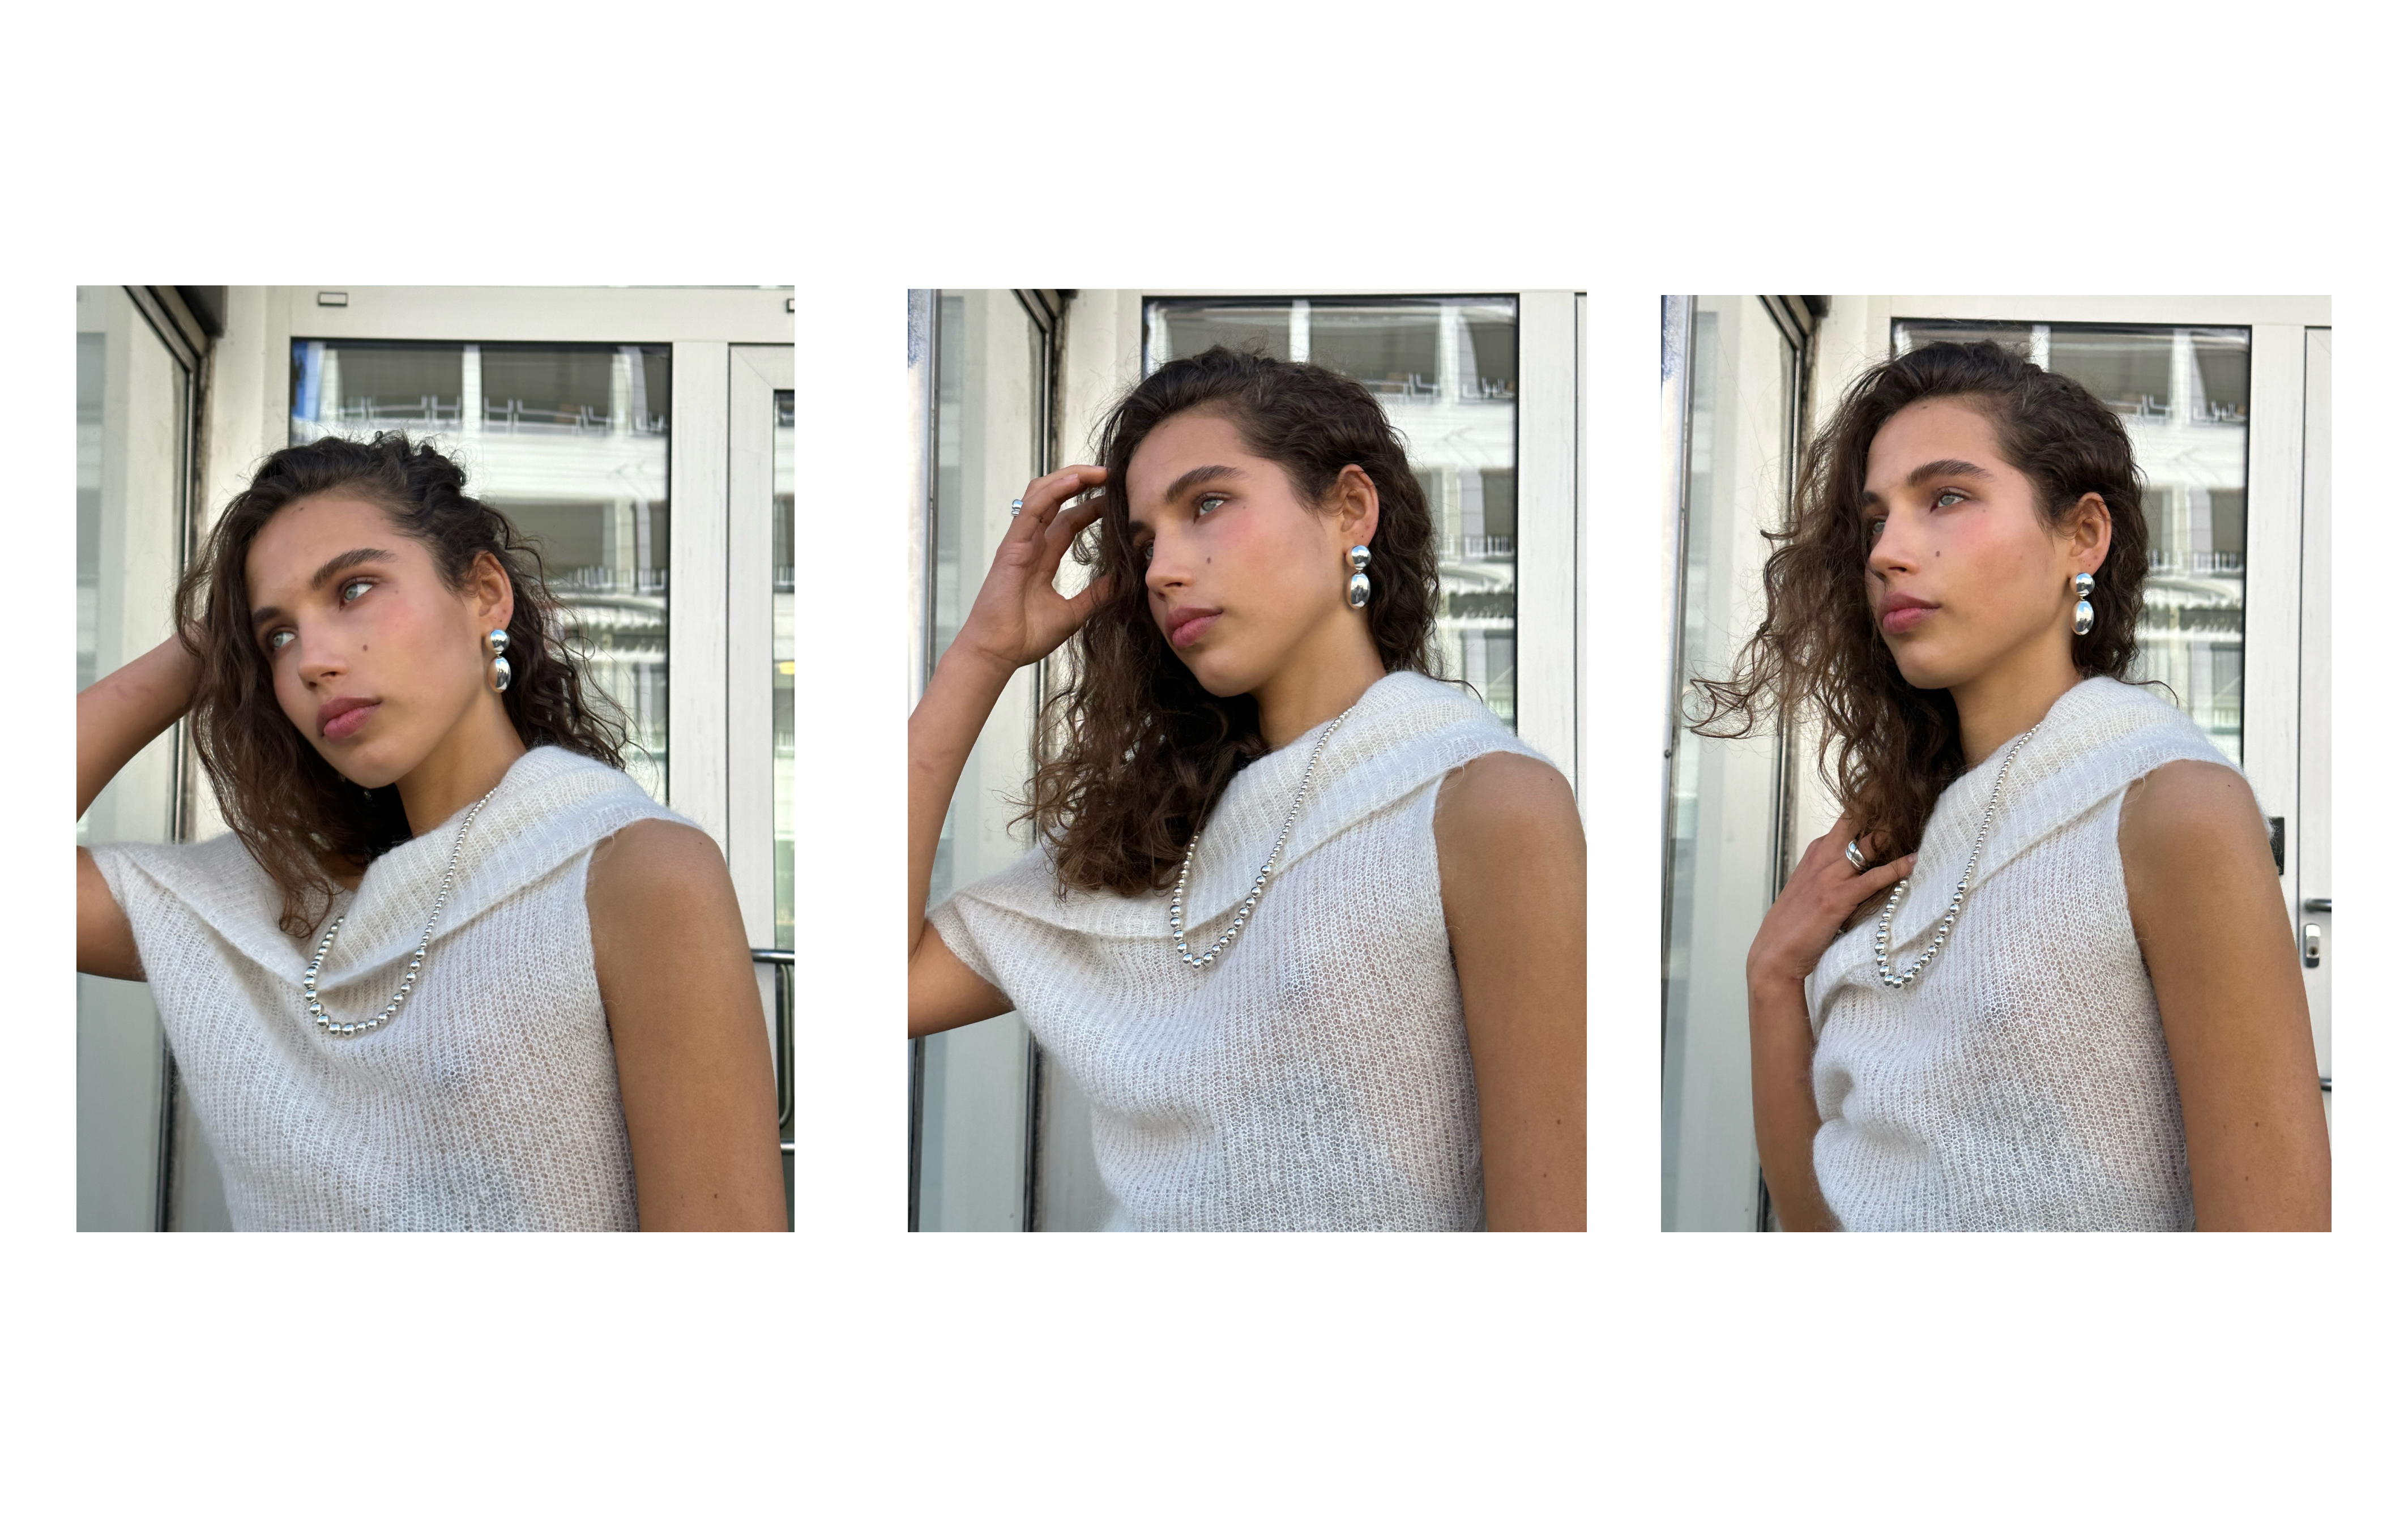 The stunning Victoria Elsebeth captured behind the scenes wearing the Klara Earrings and the Olivia Necklace